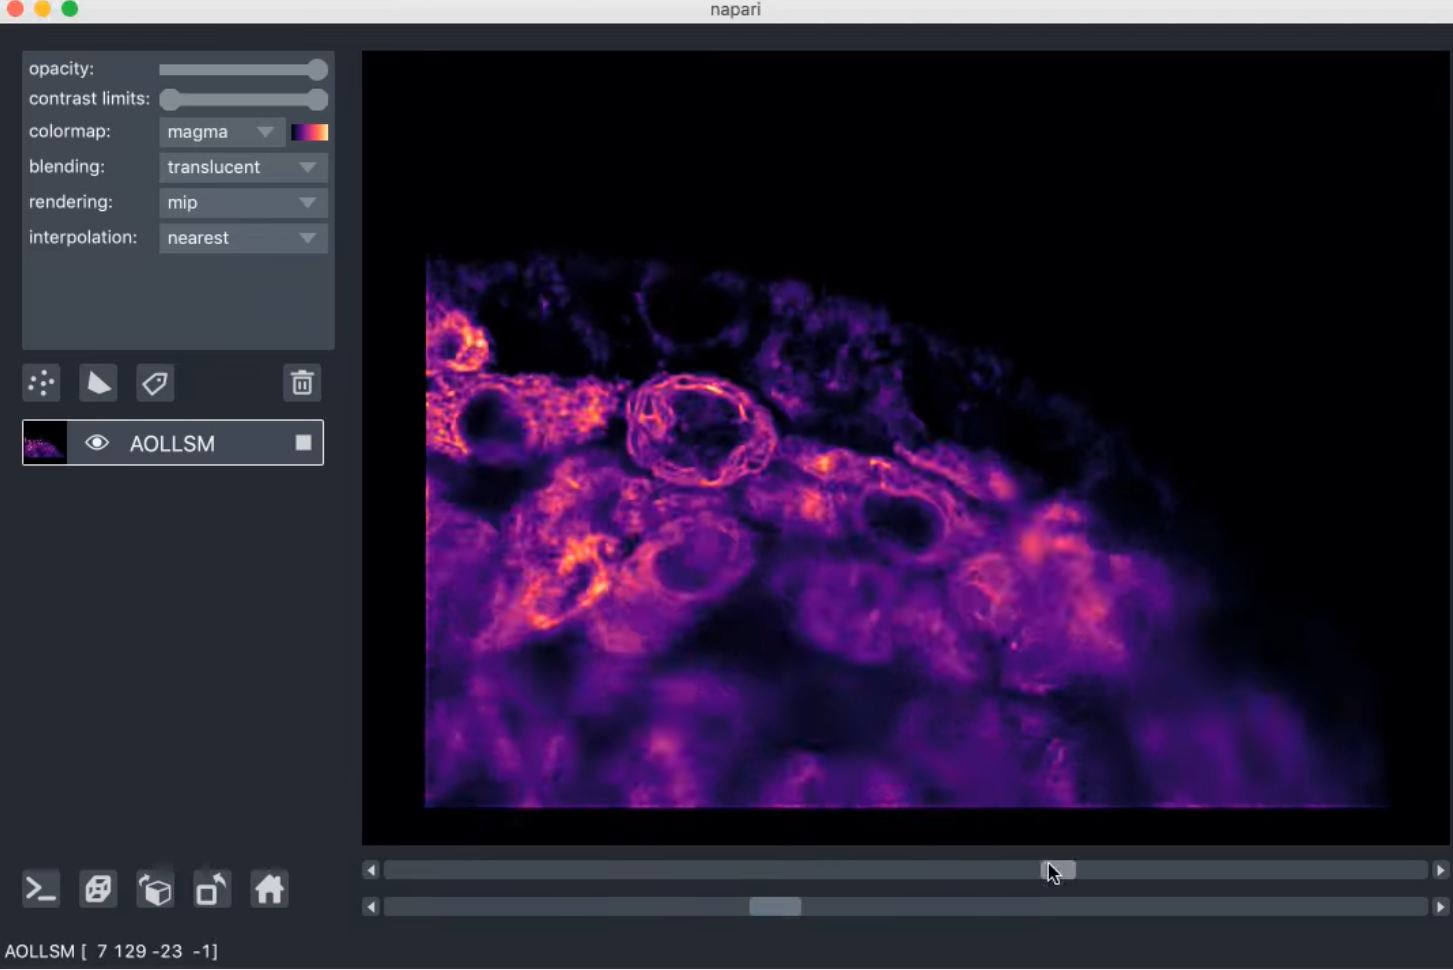 napari viewer with an image layer of lattice lightsheet data opened. It can be browsed using the slider at the bottom of the viewer.